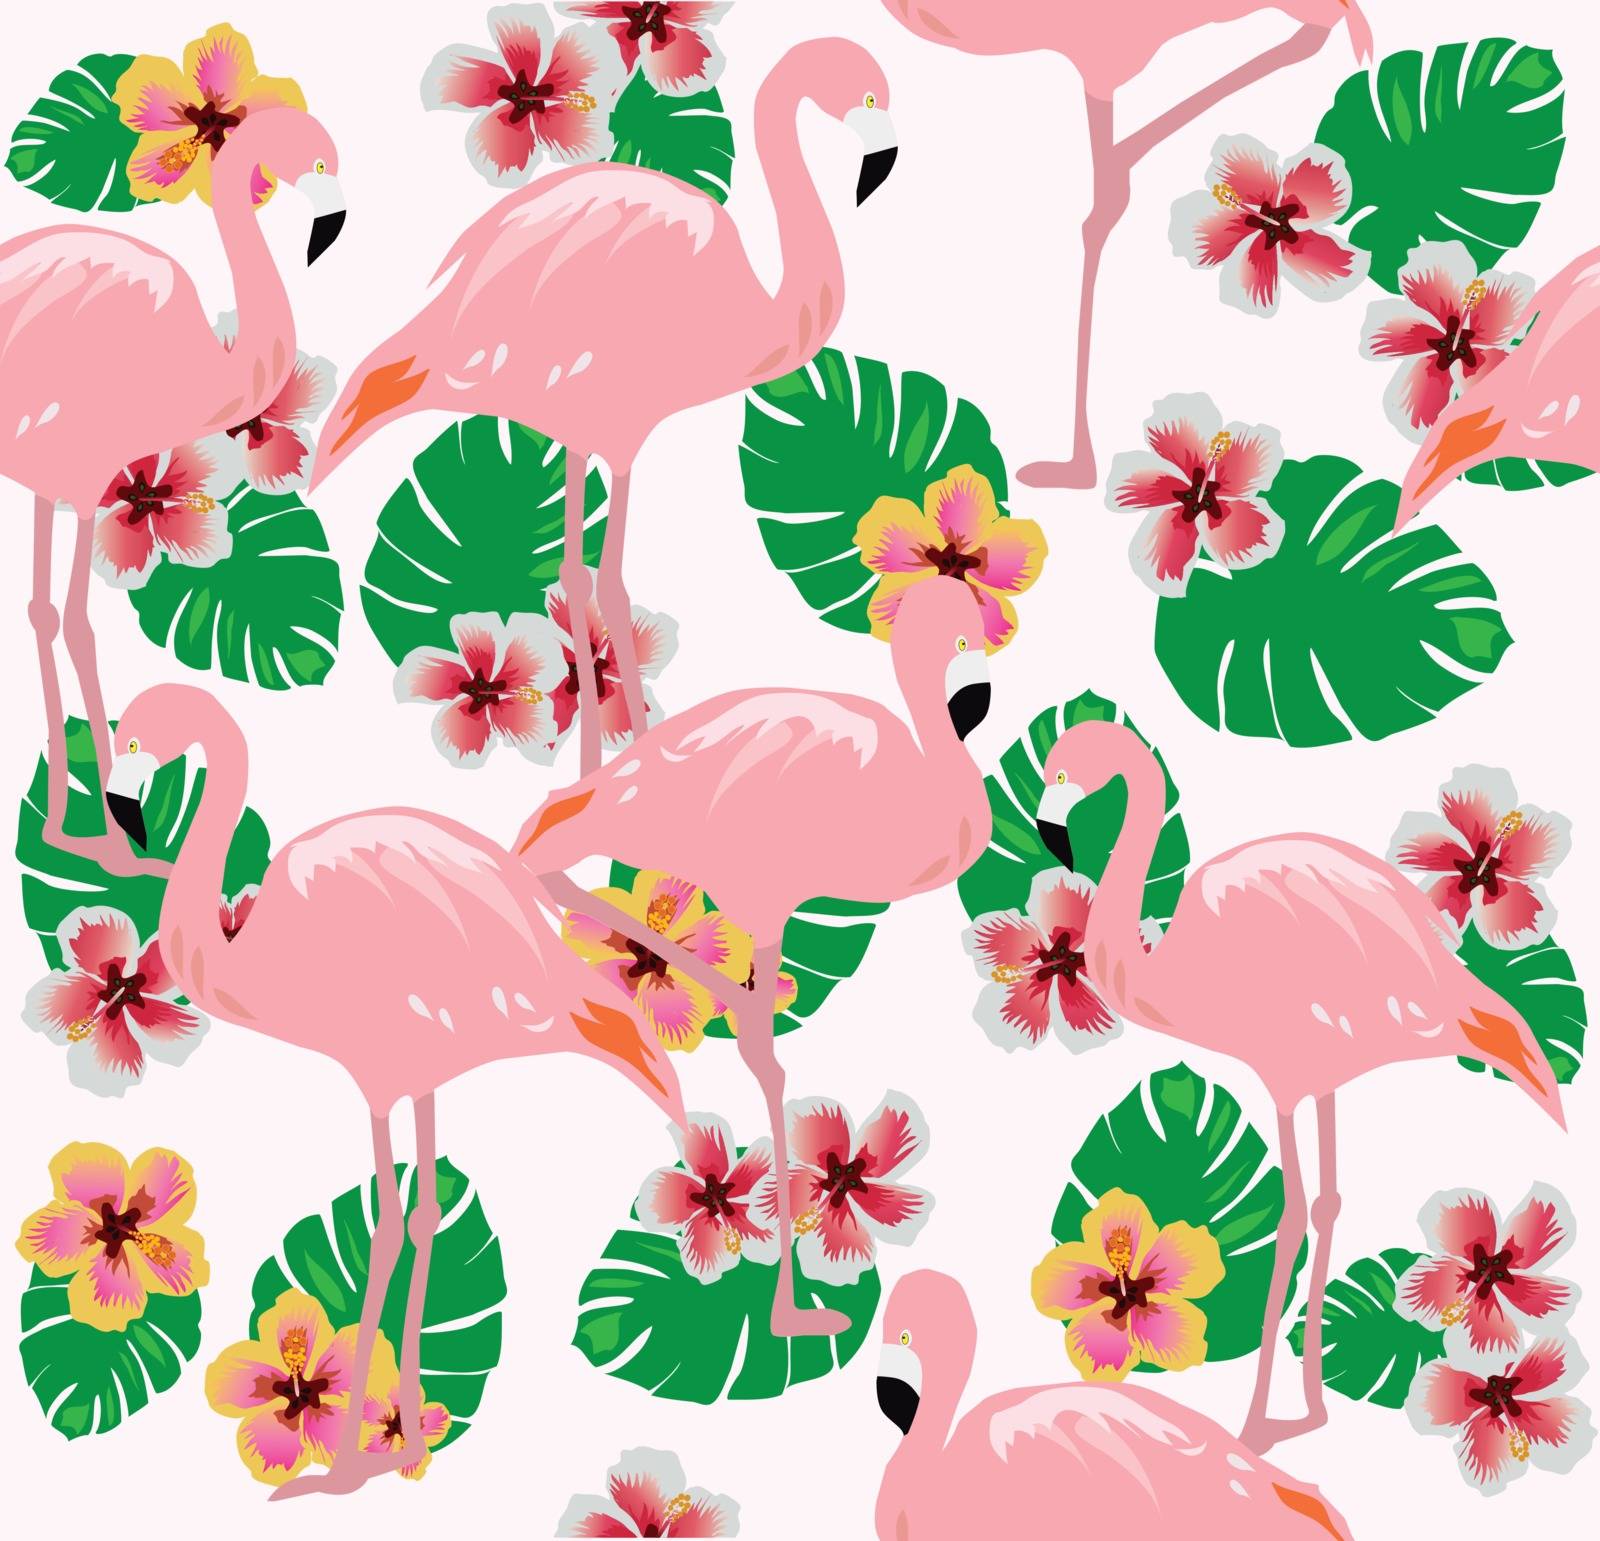 vector illustration of flamingos seamless background with palm leaves